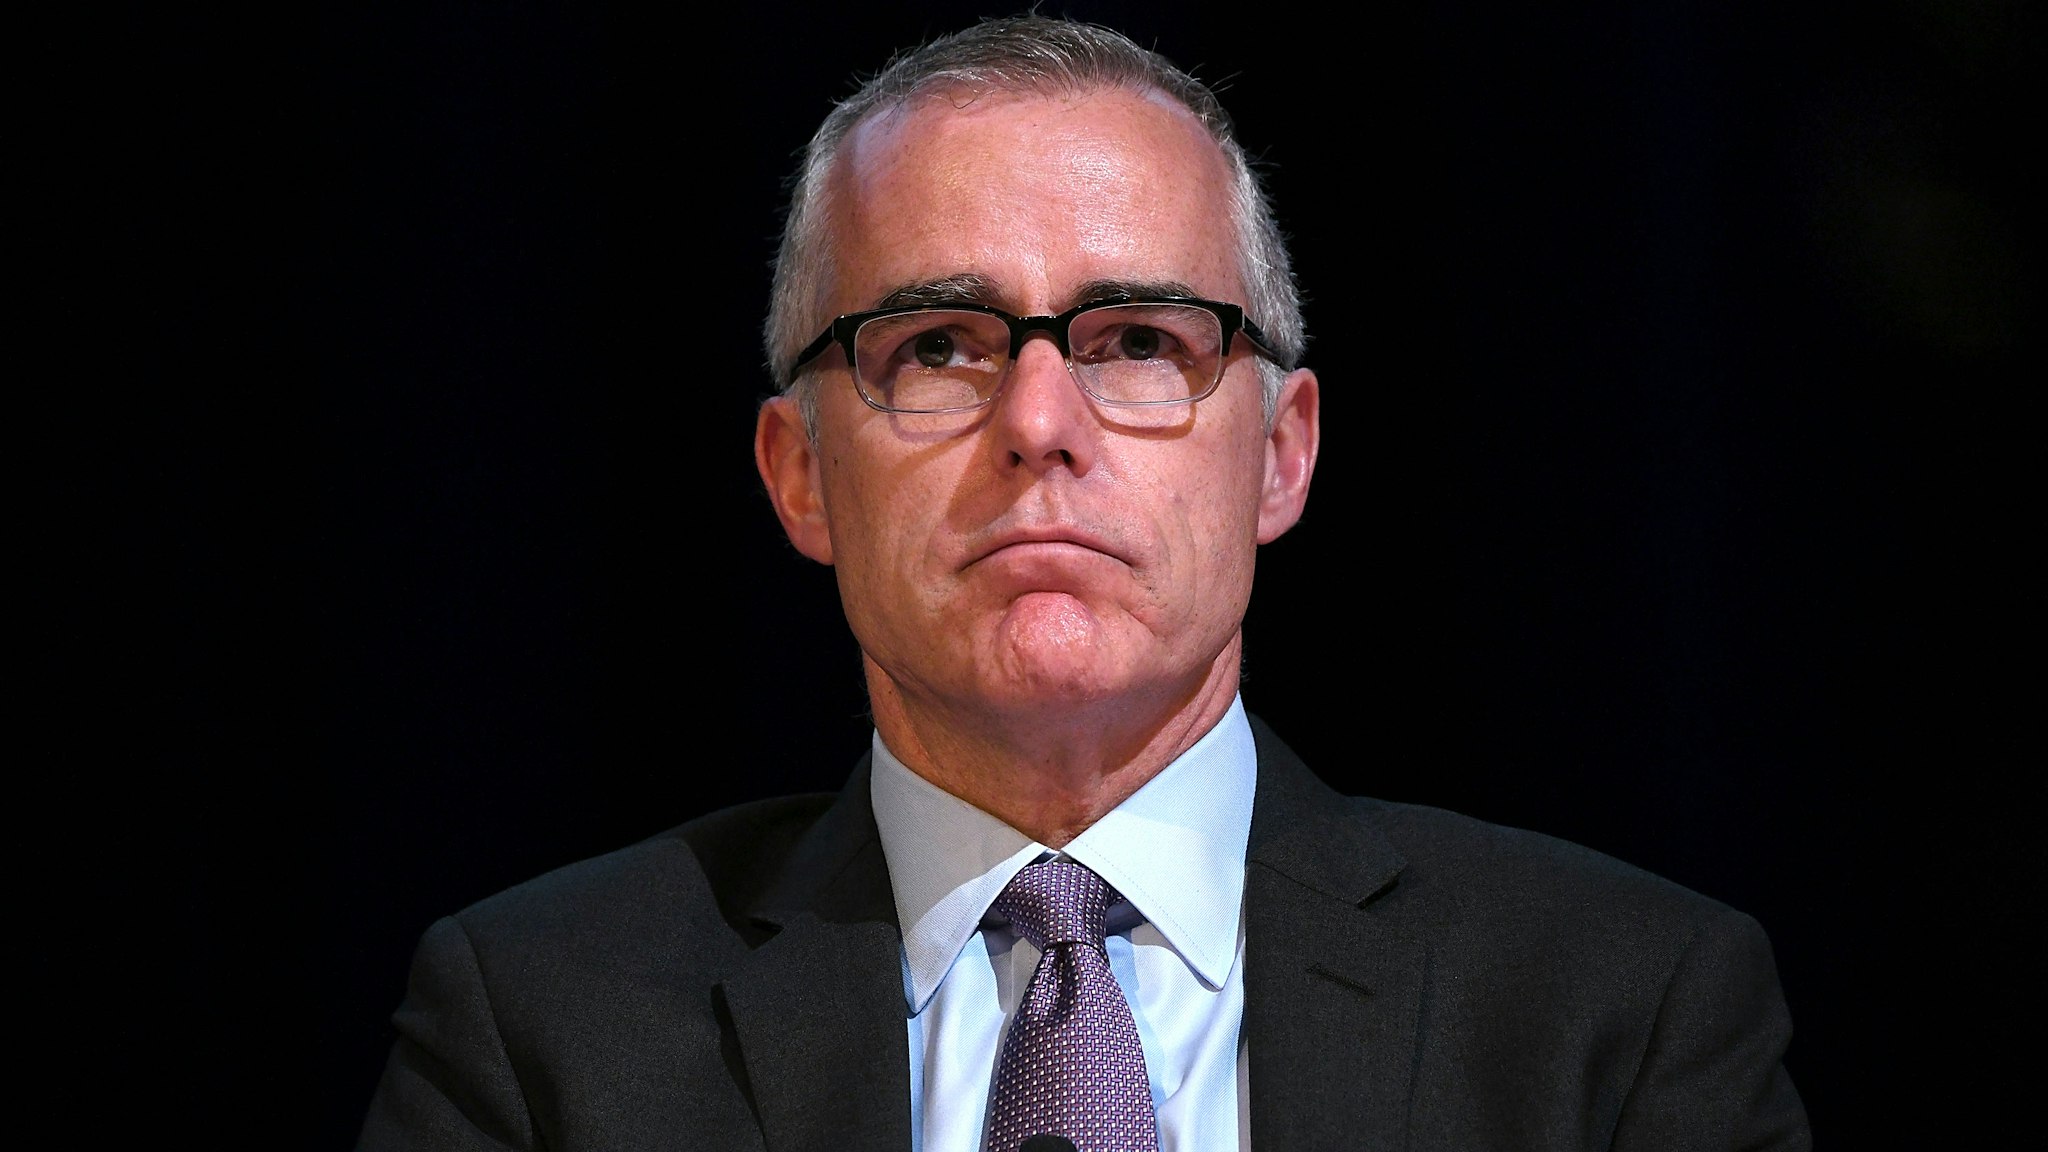 LOS ANGELES, CA - MARCH 14: Andrew McCabe presents onstage at the American Jewish University on March 14, 2019 in Los Angeles, California.